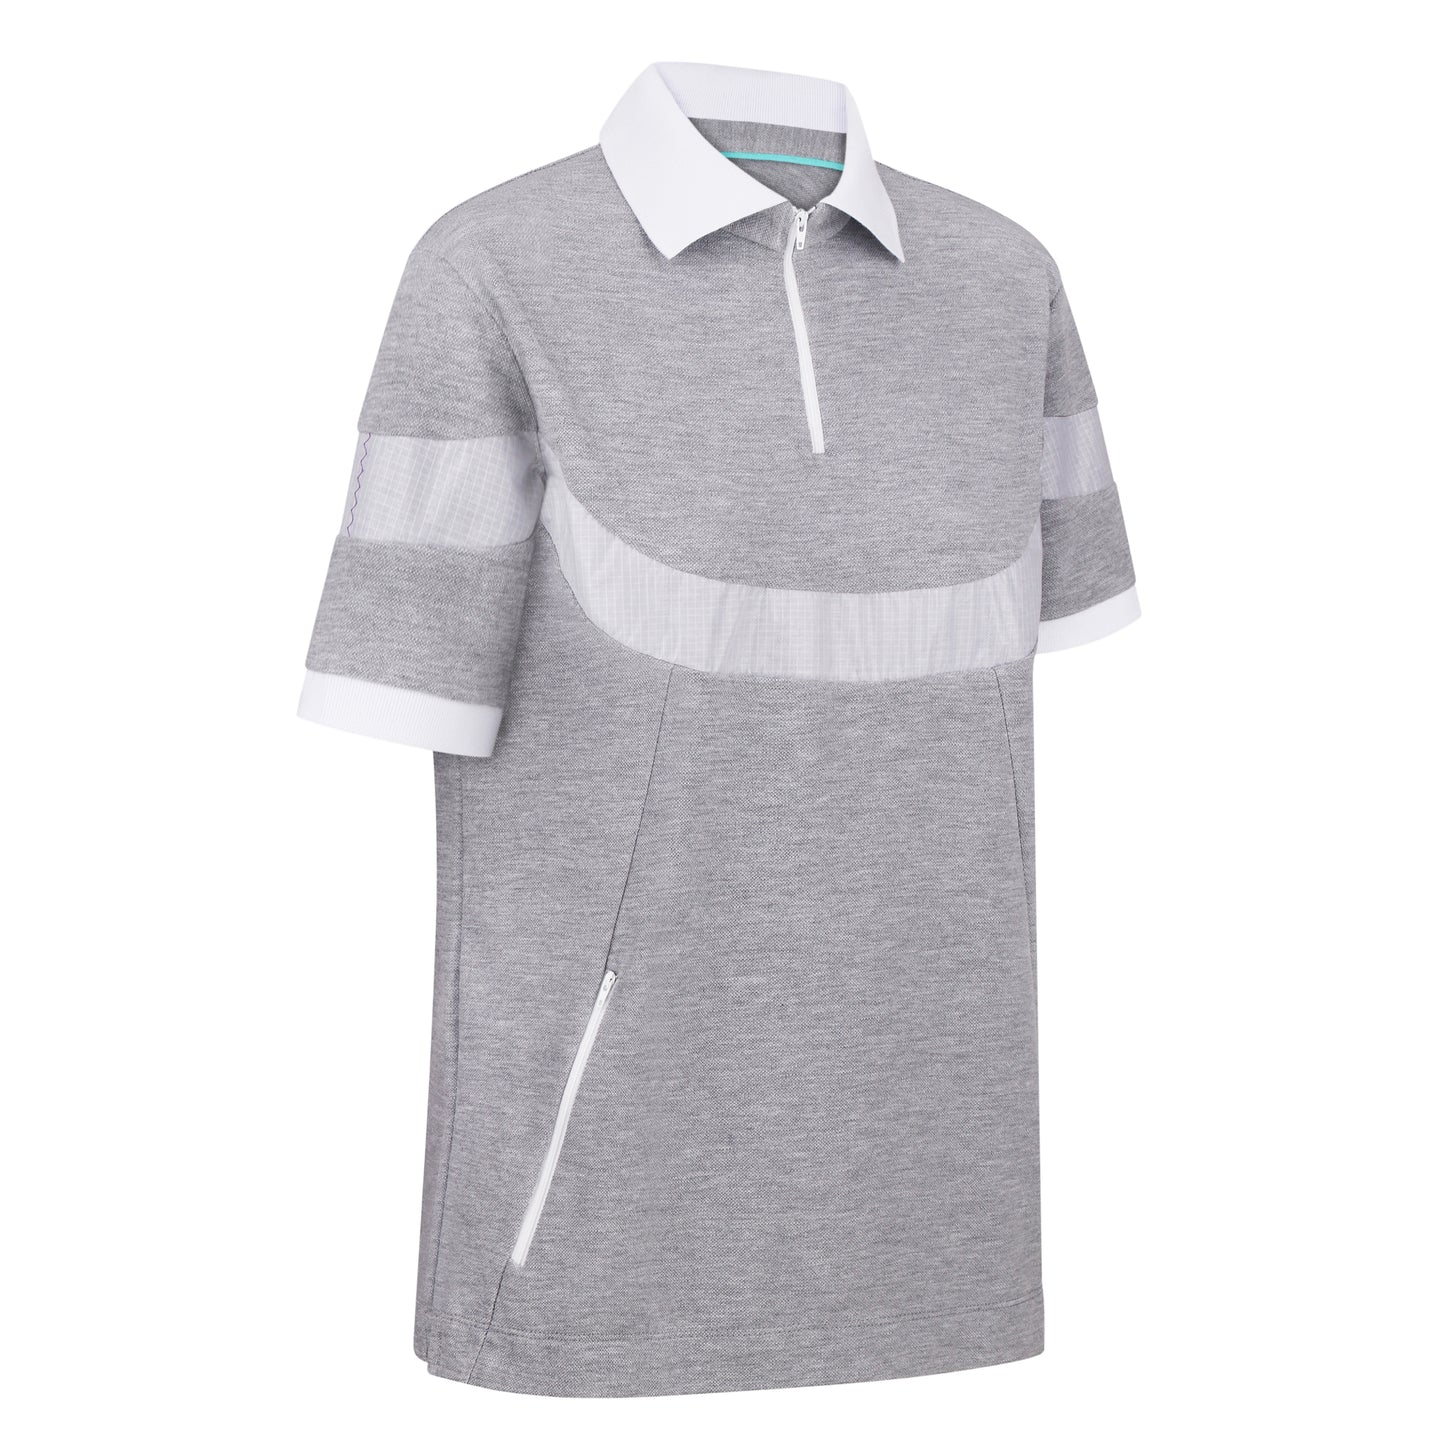 Mens polo shirt with short sleeves from REwind - manufacturer brand from Ukraine